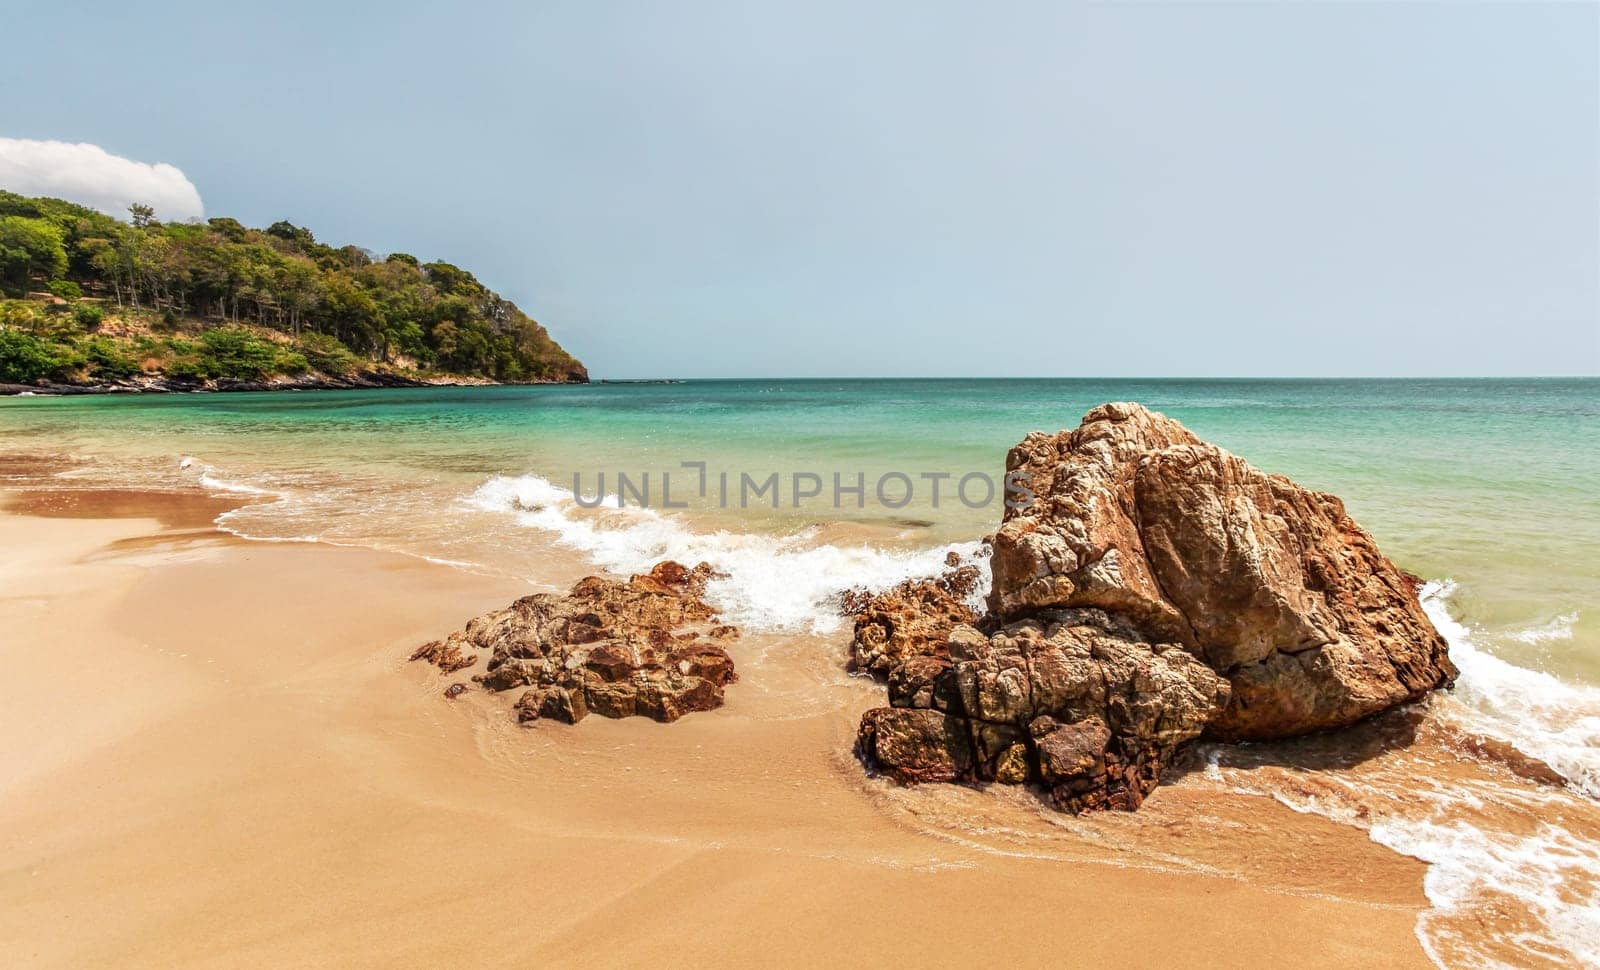 Beautiful unspoiled beach with two rocks in foreground. Klong Nin, Koh Lanta, Thailand